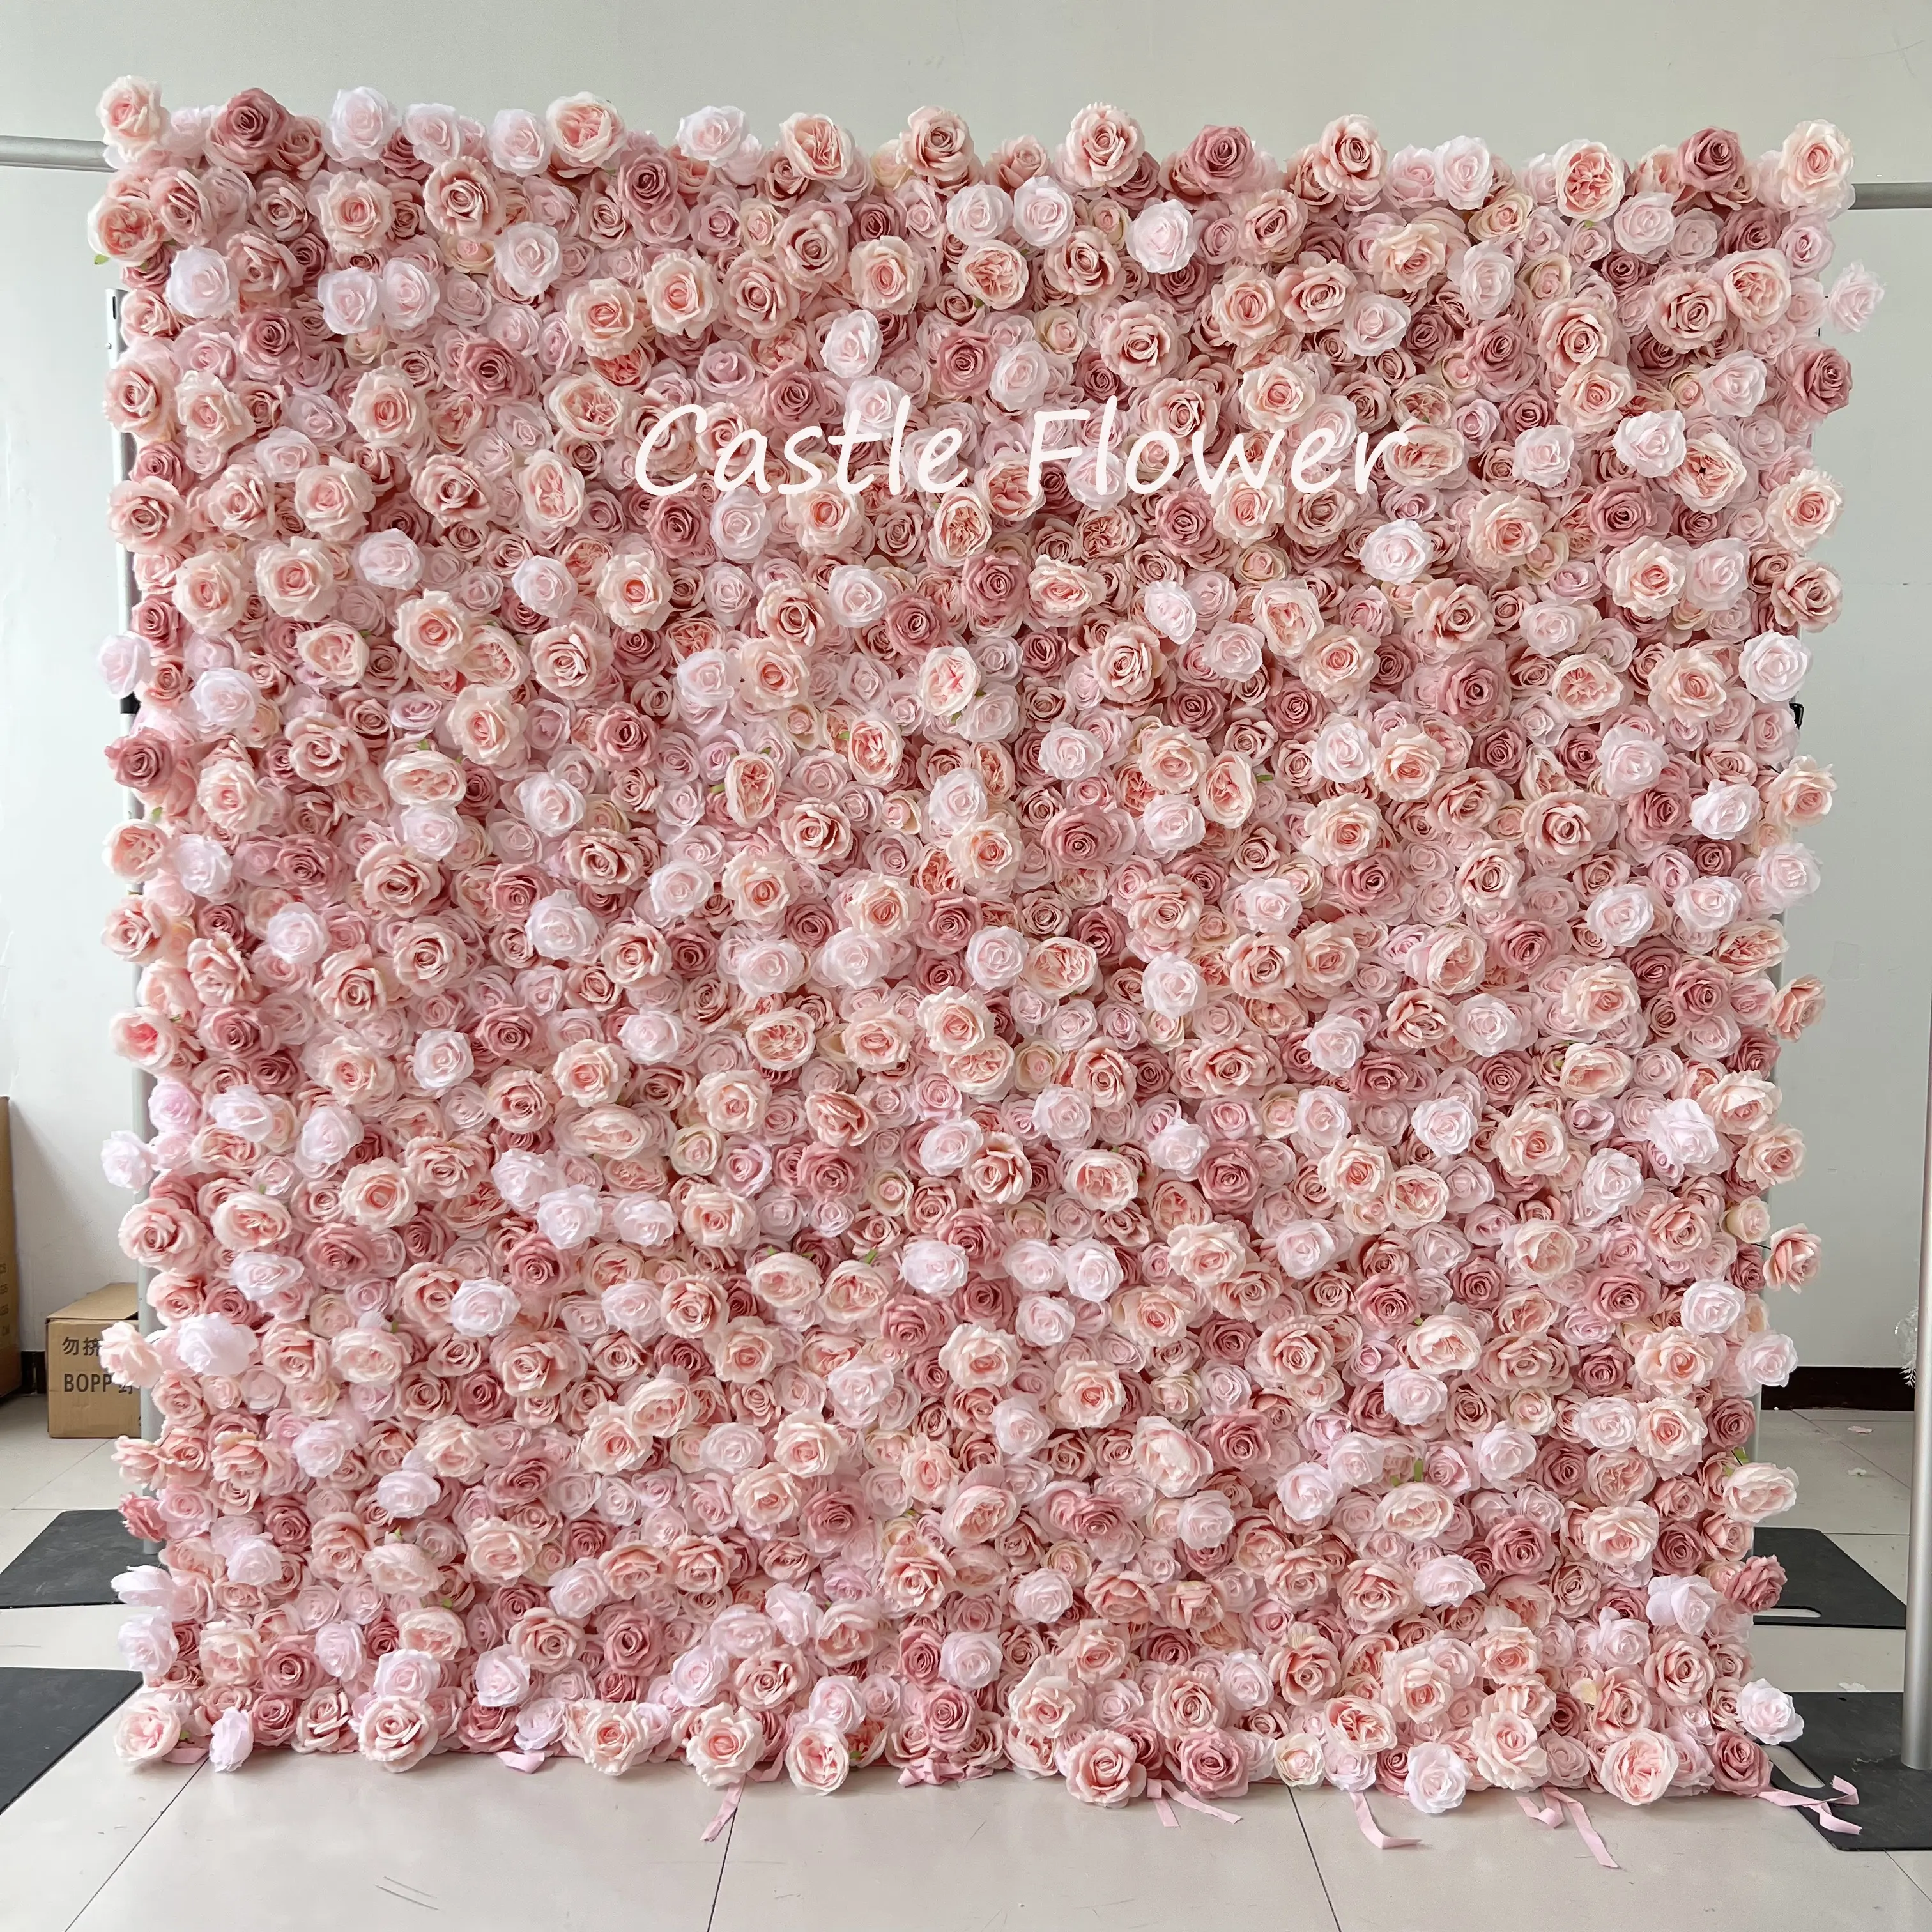 O-W042 Wholesale Price Roll Up Fabric Pink Flower Wall Backdrop 8ft x 8ft Rose Hydrangea Silk Flower Wall Panels for Wedding